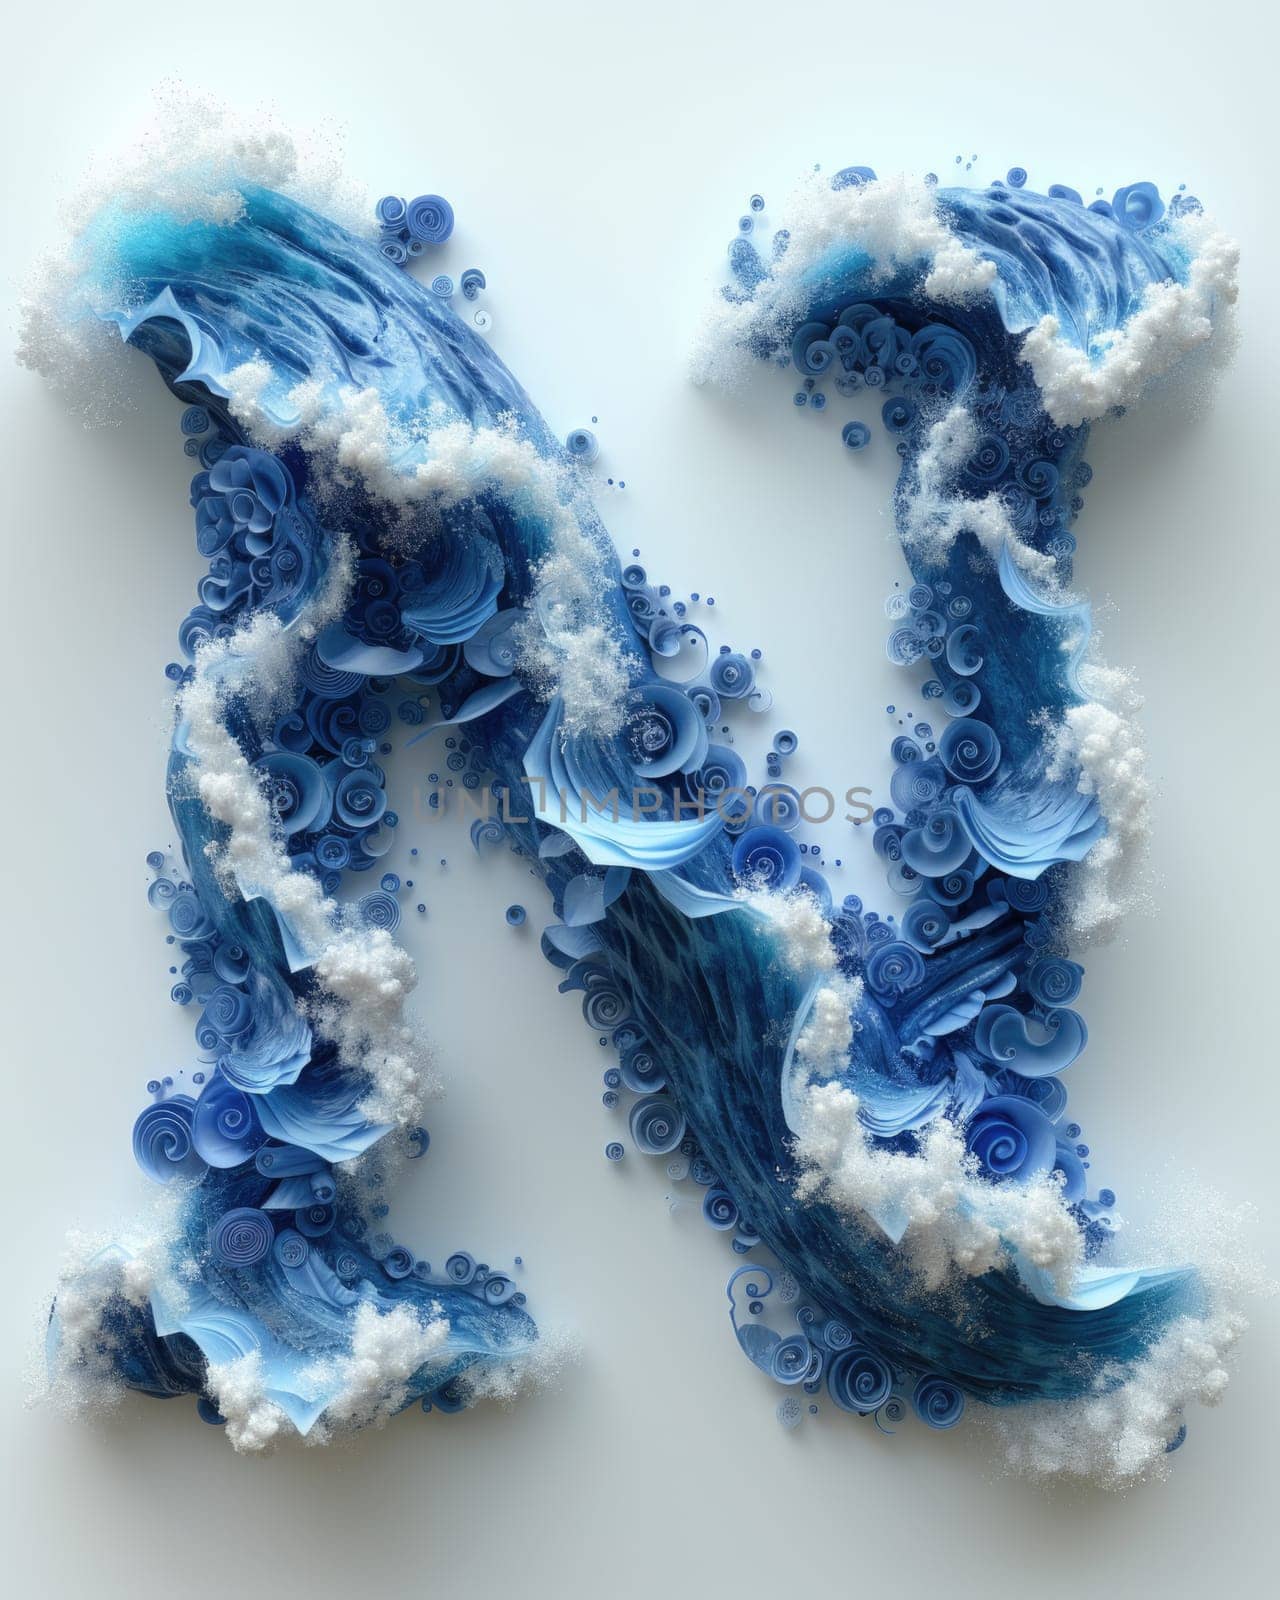 A letter made out of blue and white paper resting on the sandy seashore.